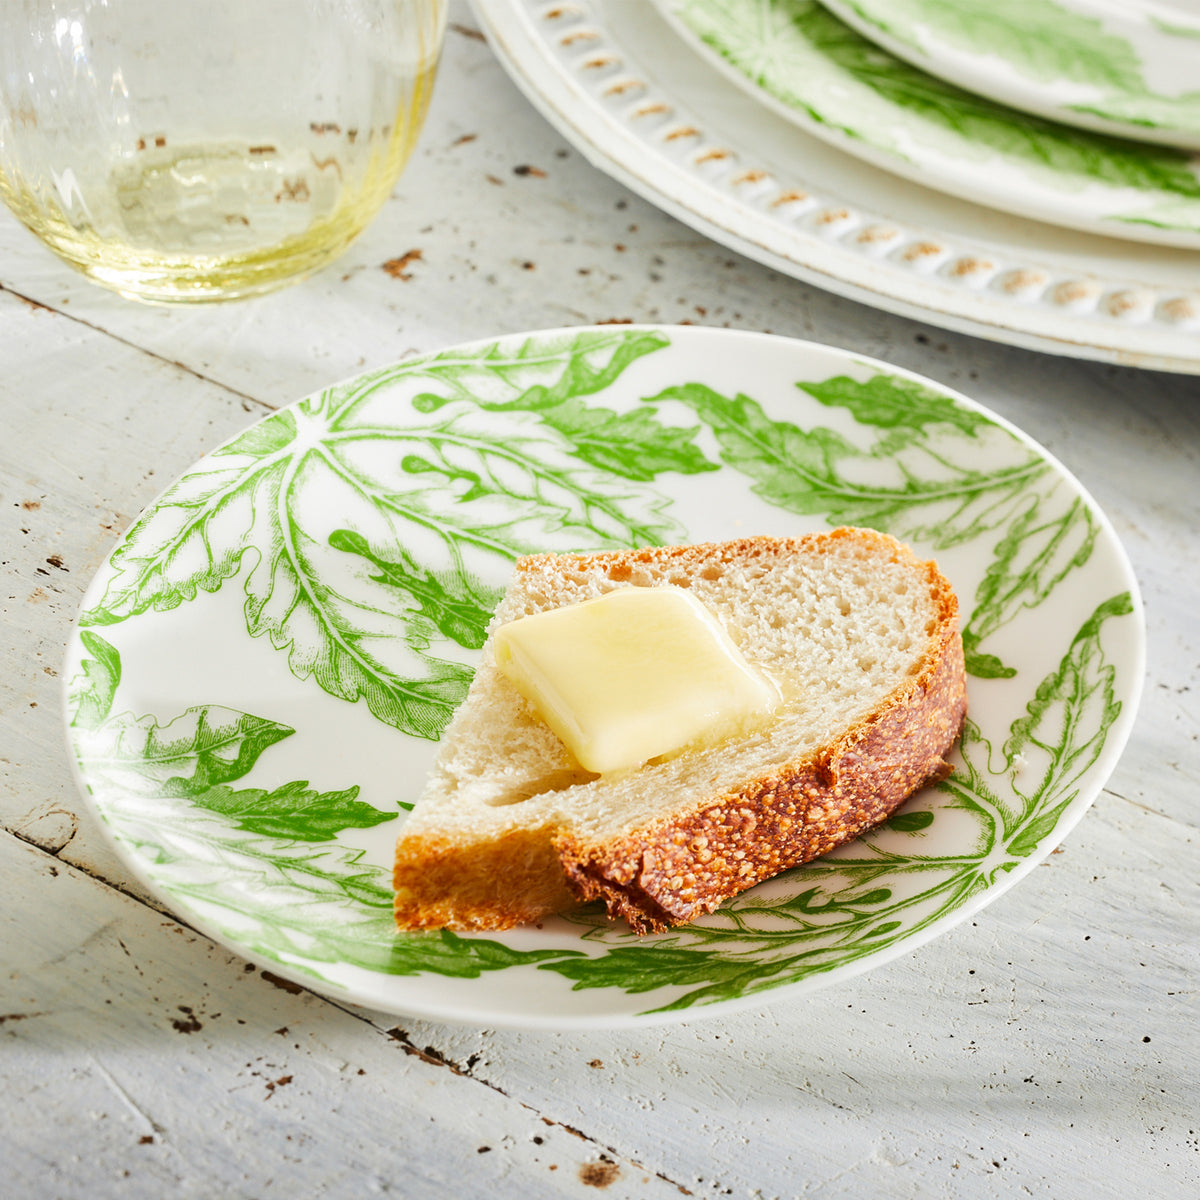 A slice of bread with a pat of butter rests on Freya Small Plates by Caskata Artisanal Home, showcasing a green floral pattern, placed on a white wooden surface. A glass and a plate are partly visible in the background.